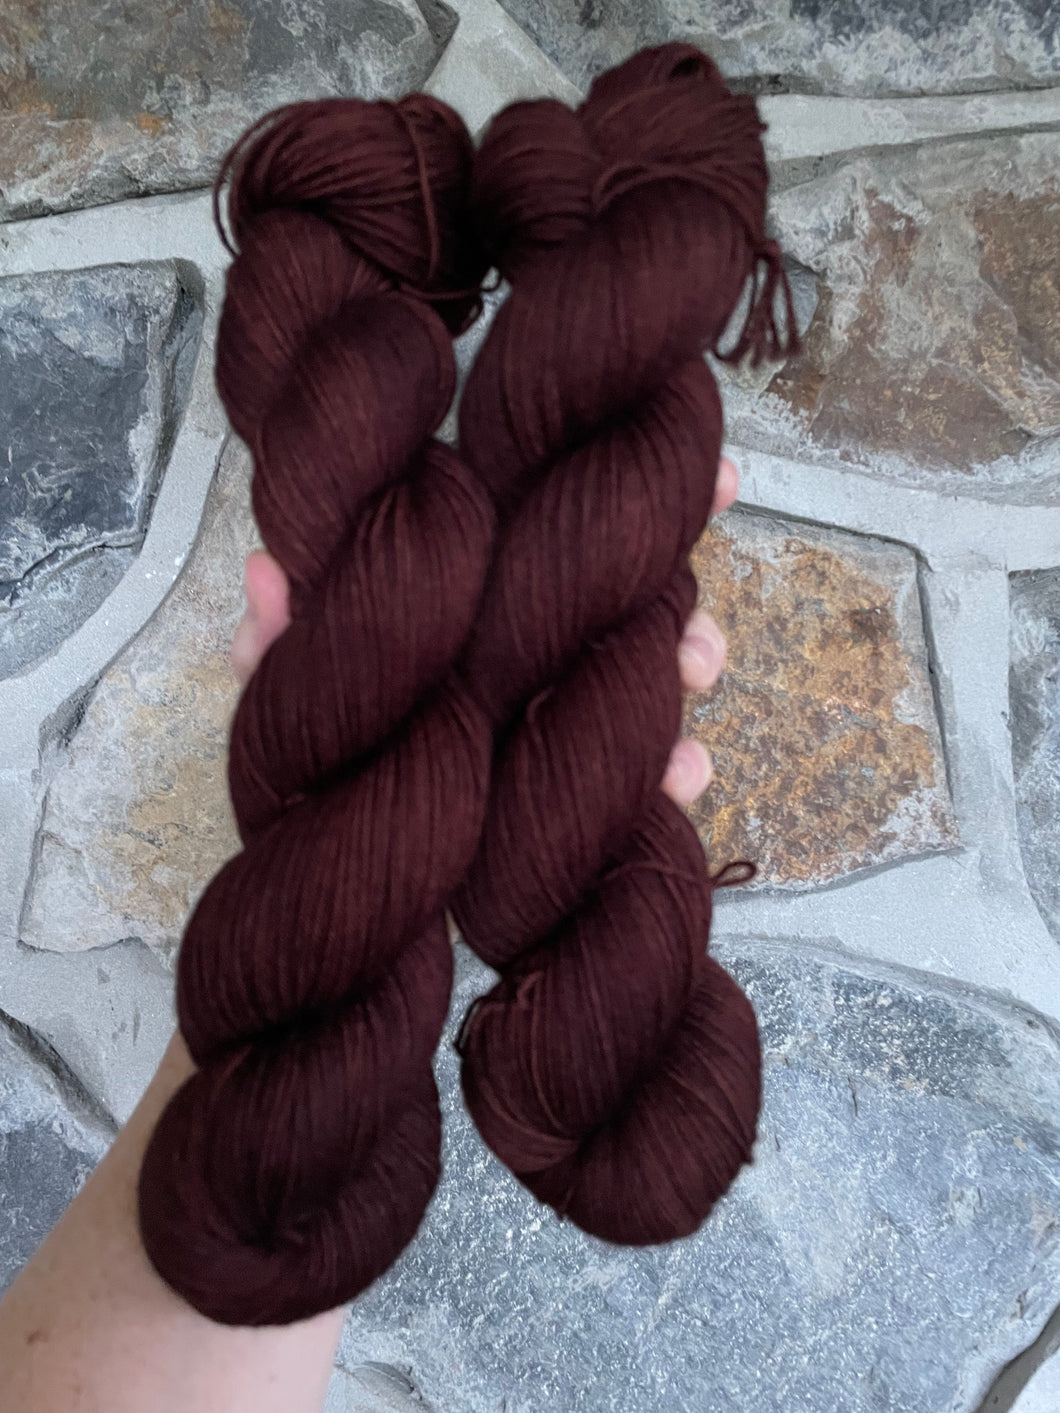 4ply Bluefaced Leicester 'Chilli Choc'